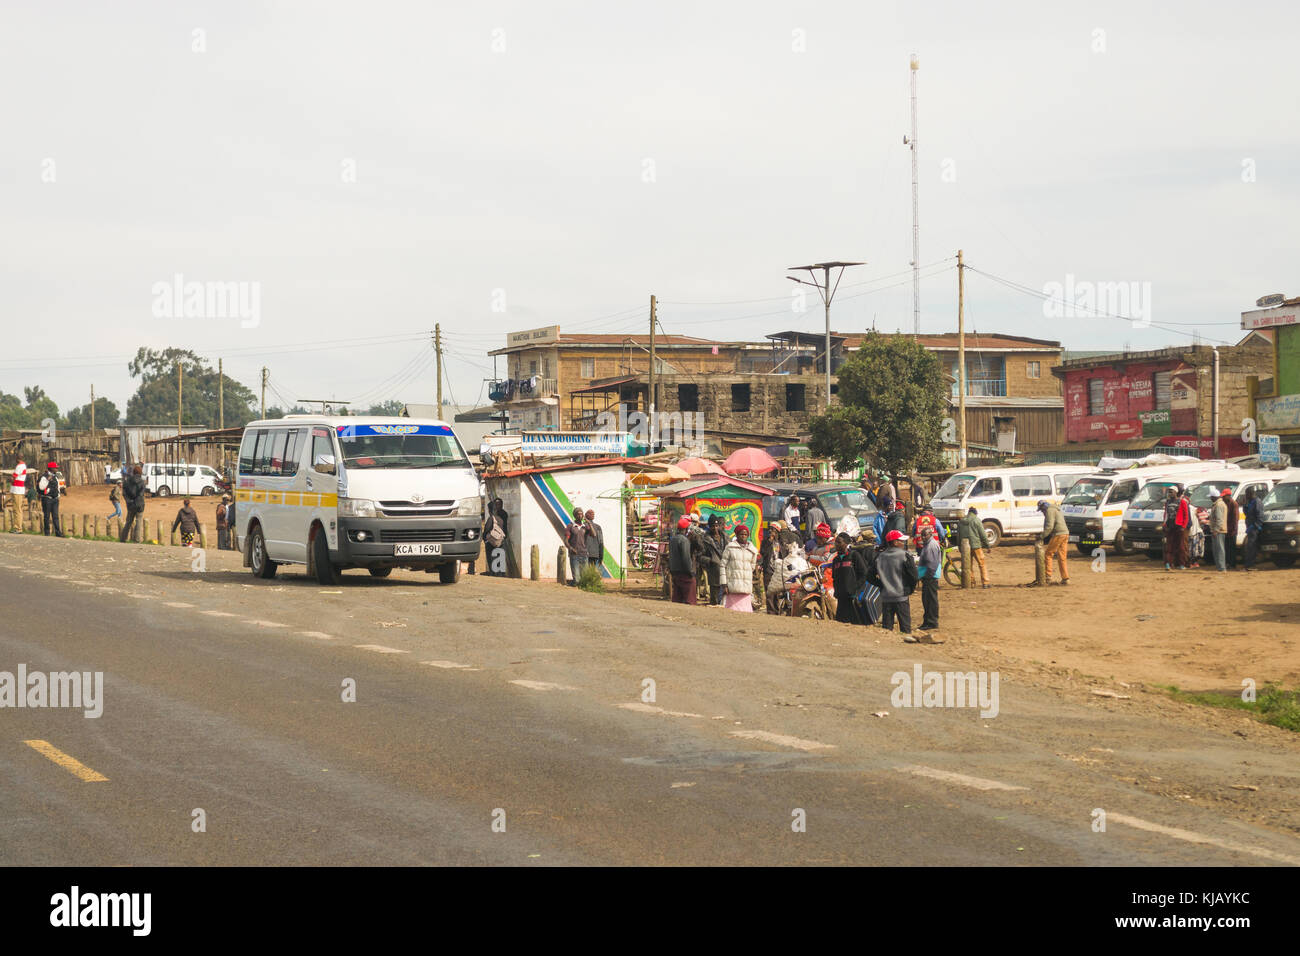 A small town bus stop with people waiting by the roadside as a matatu minibus arrives, Kenya, East Africa Stock Photo